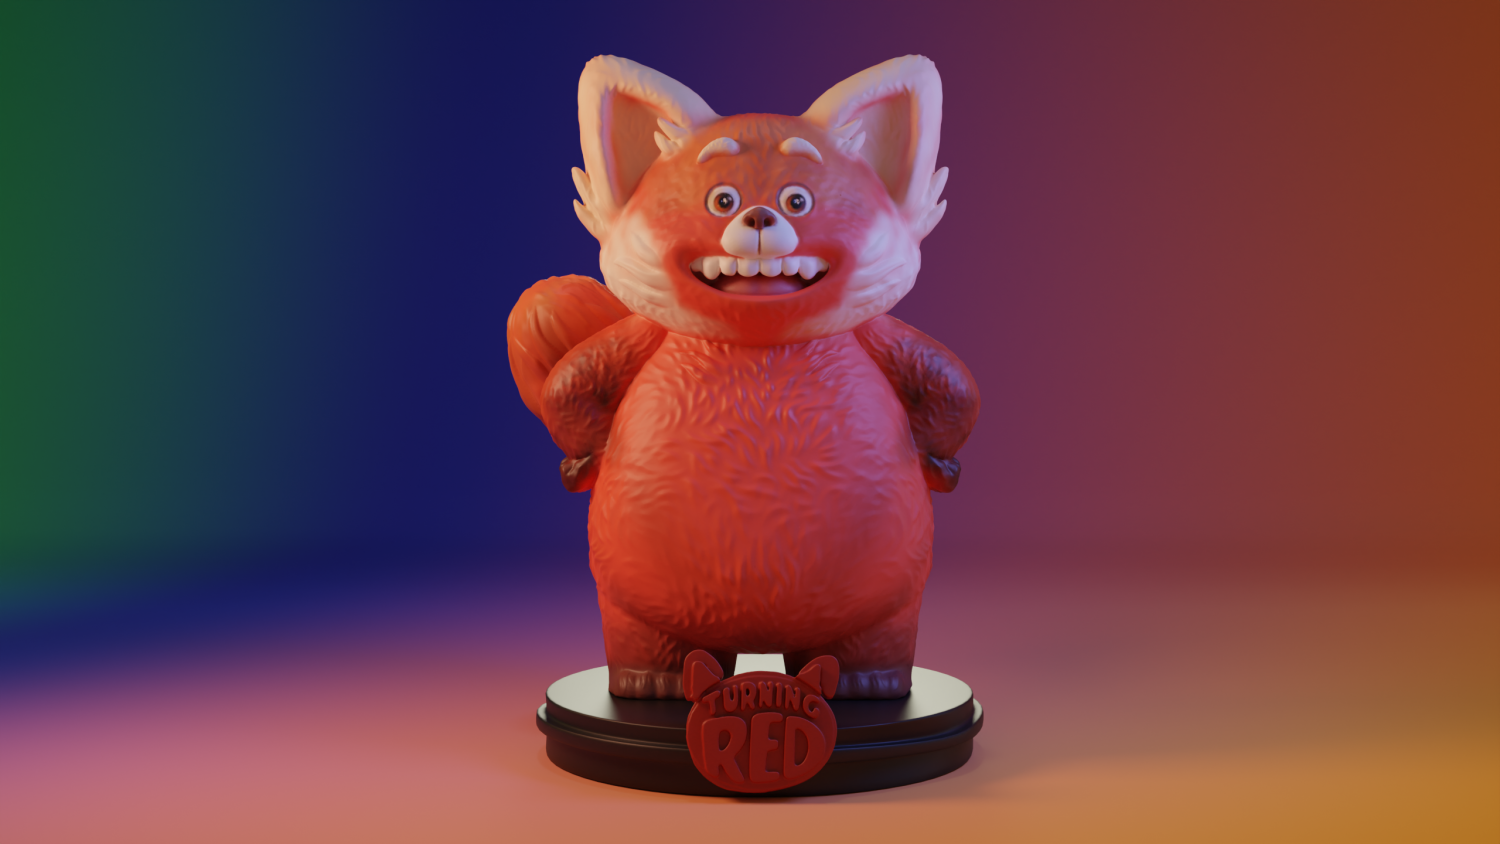 PC / Computer - Tattletail - Tattletail - The Models Resource